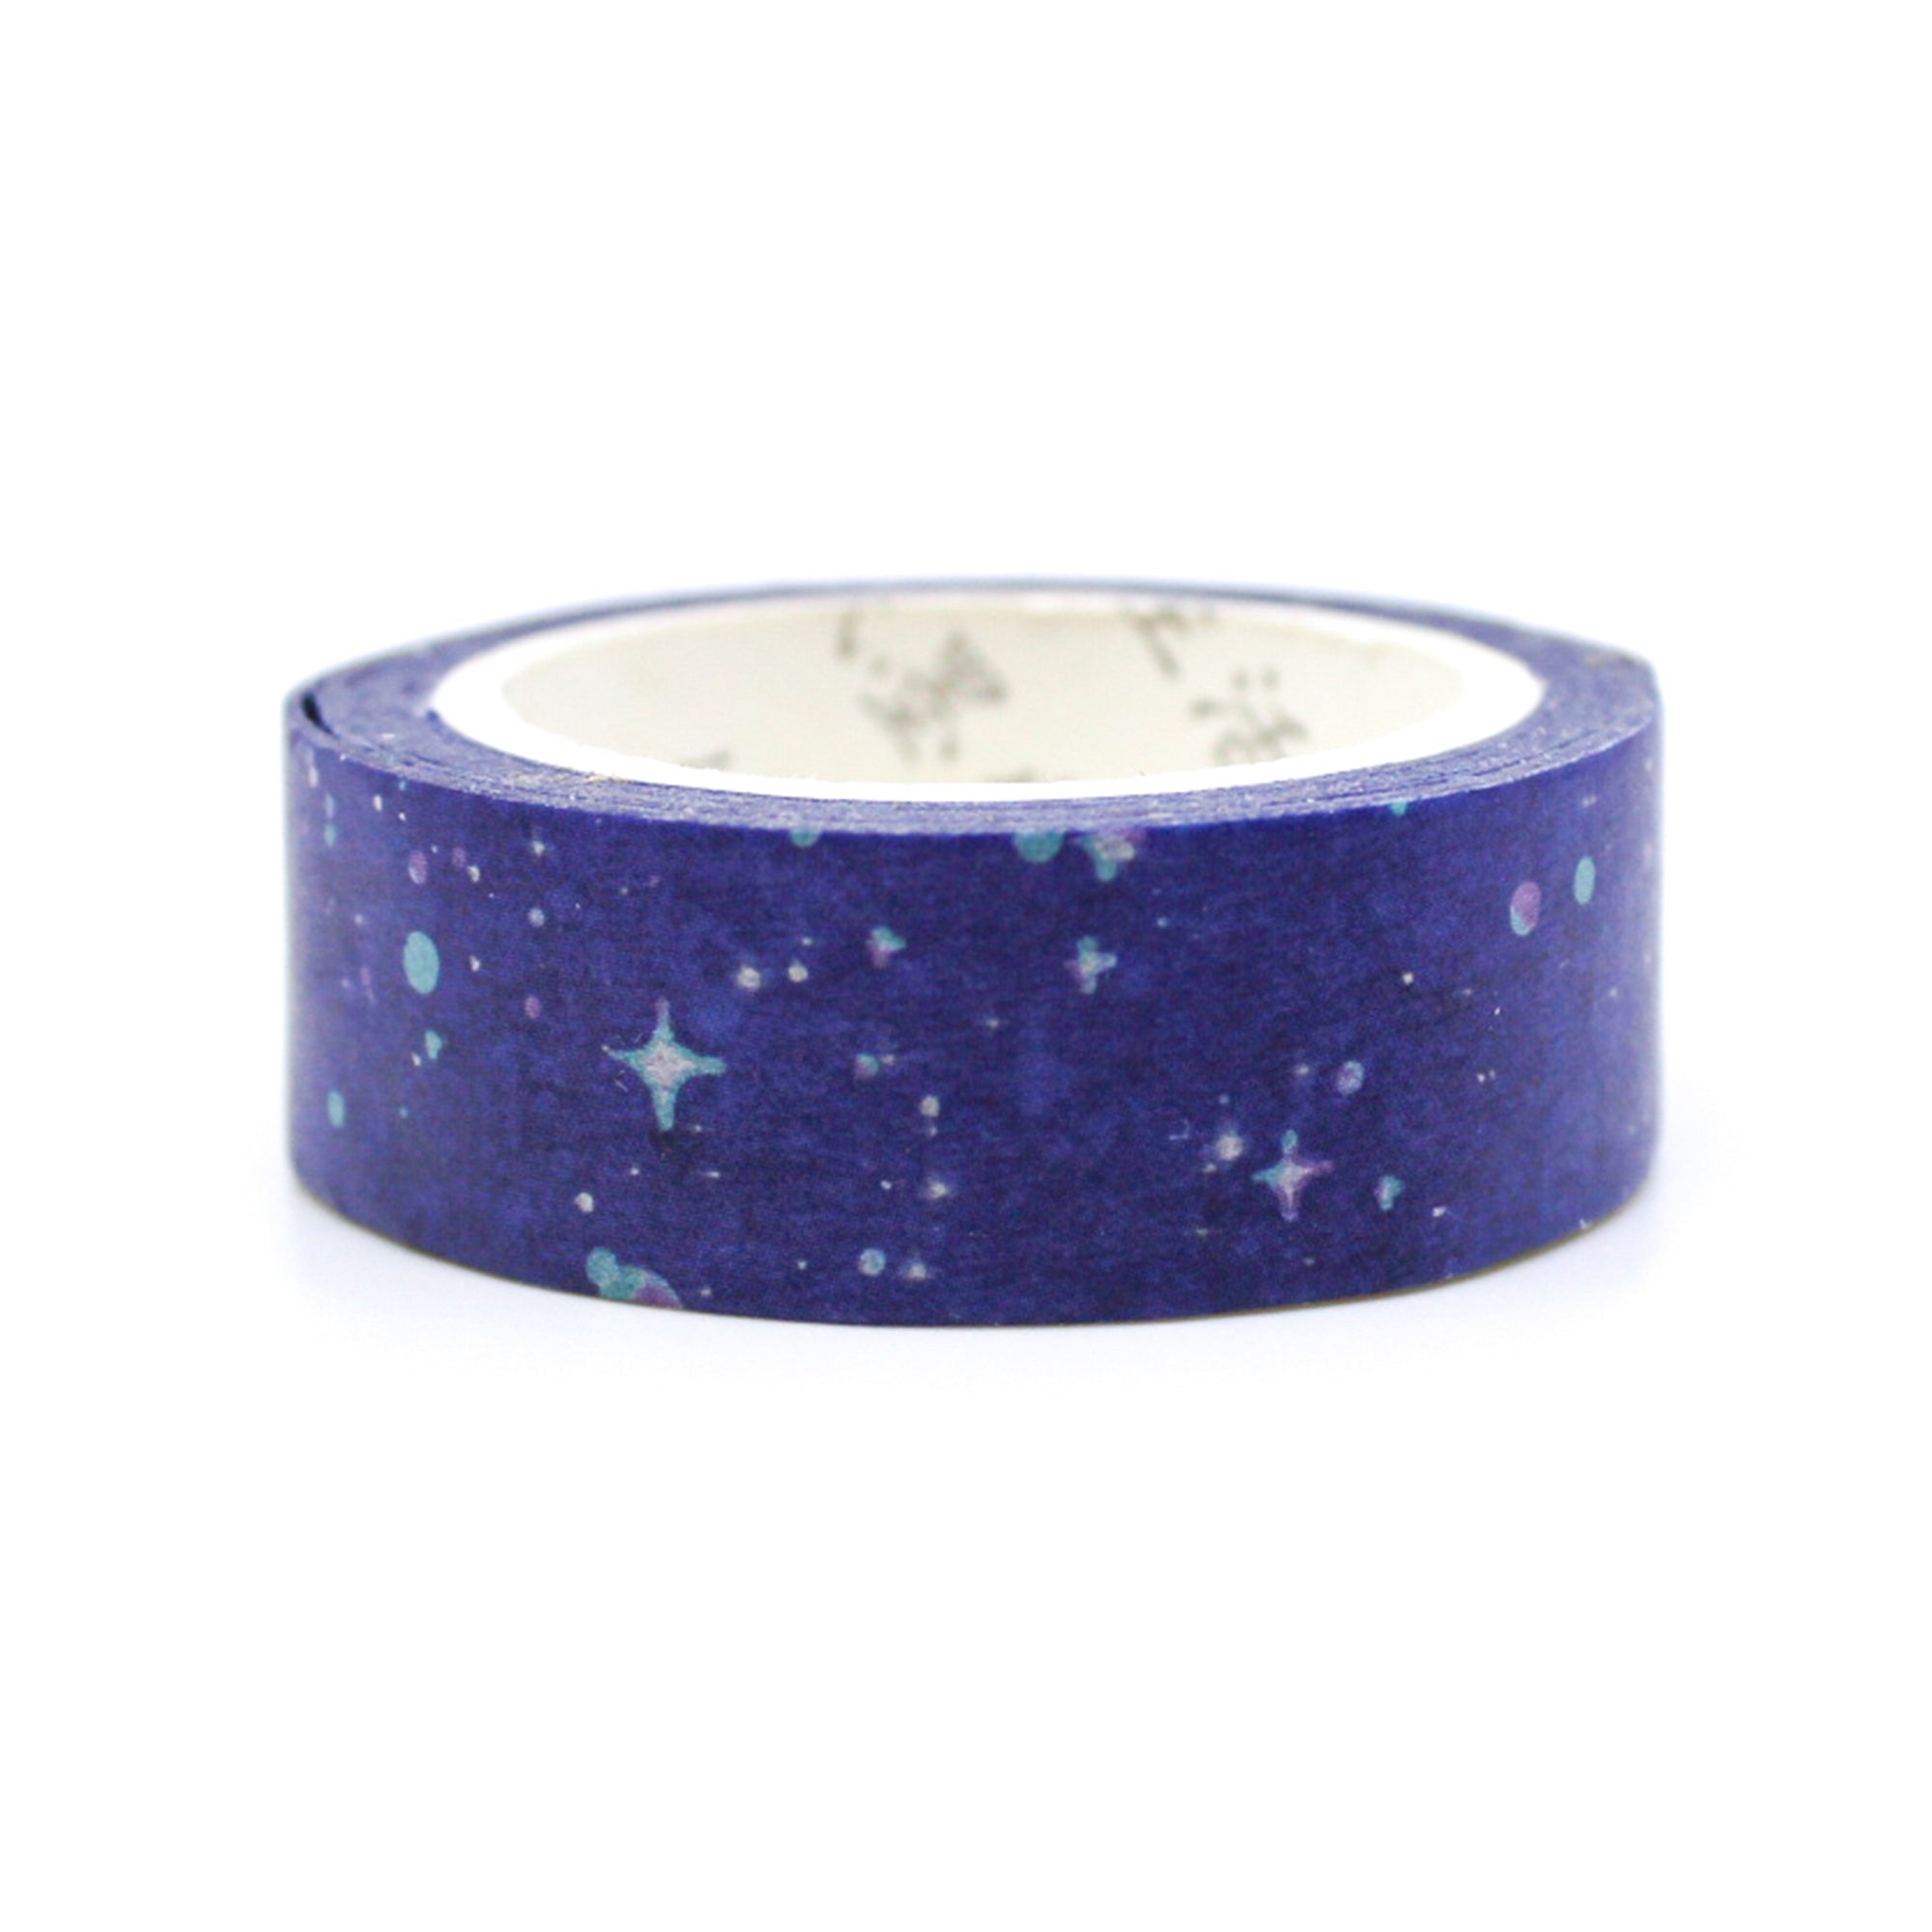 This starry night sky watercolor washi tape is the perfect addition to your washi collection. The simplicity of the pattern is perfect for accenting and matching any project's theme while adding a beautiful and interesting pattern. This tape is sold at BBB Supplies craft shop.